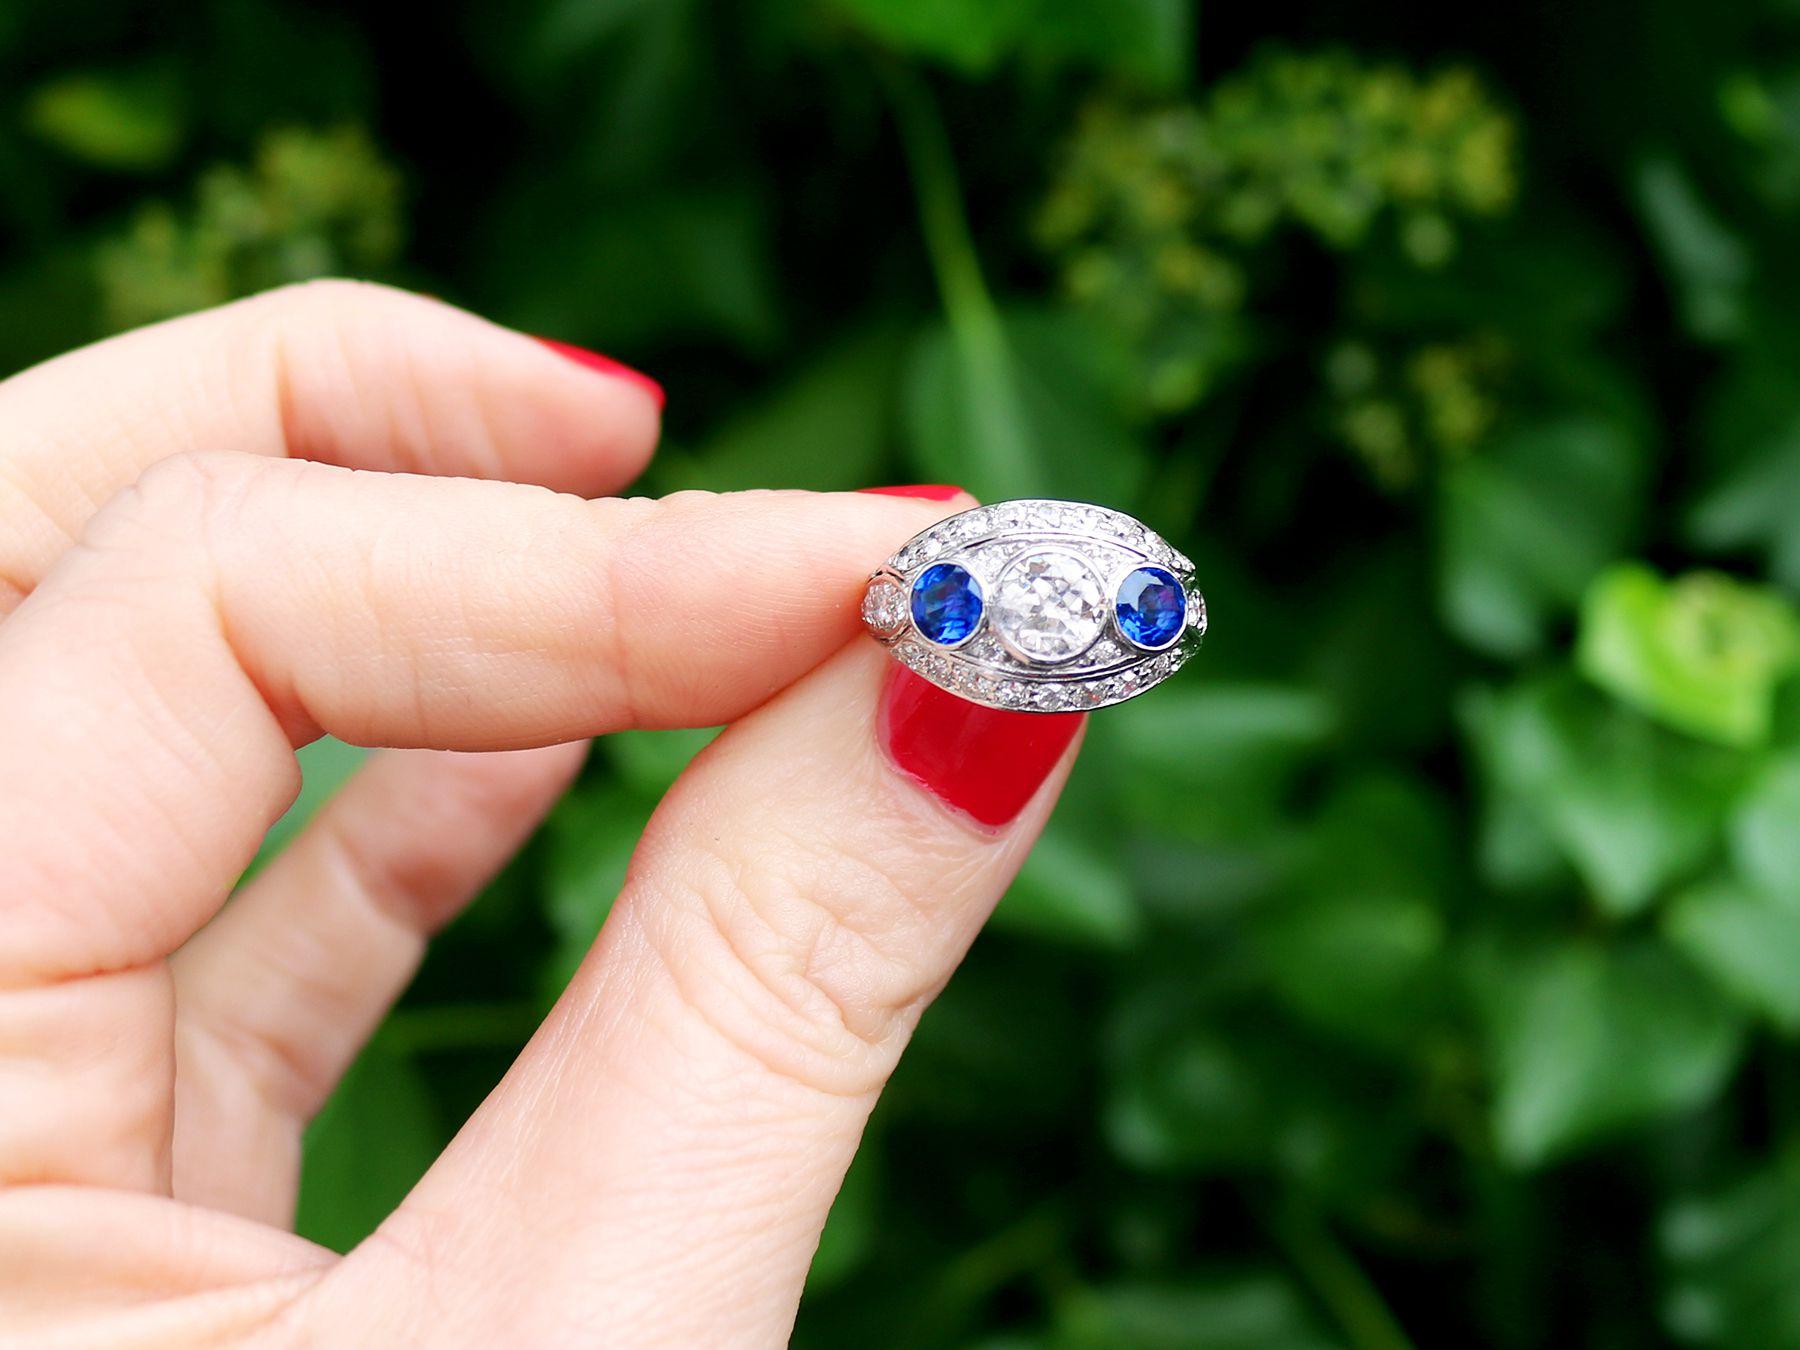 A stunning antique 1930s 1.94 carat diamond and 0.90 carat sapphire, platinum cocktail ring; part of our diverse antique jewelry and estate jewelry collections.

This stunning, fine and impressive antique sapphire ring has been crafted in